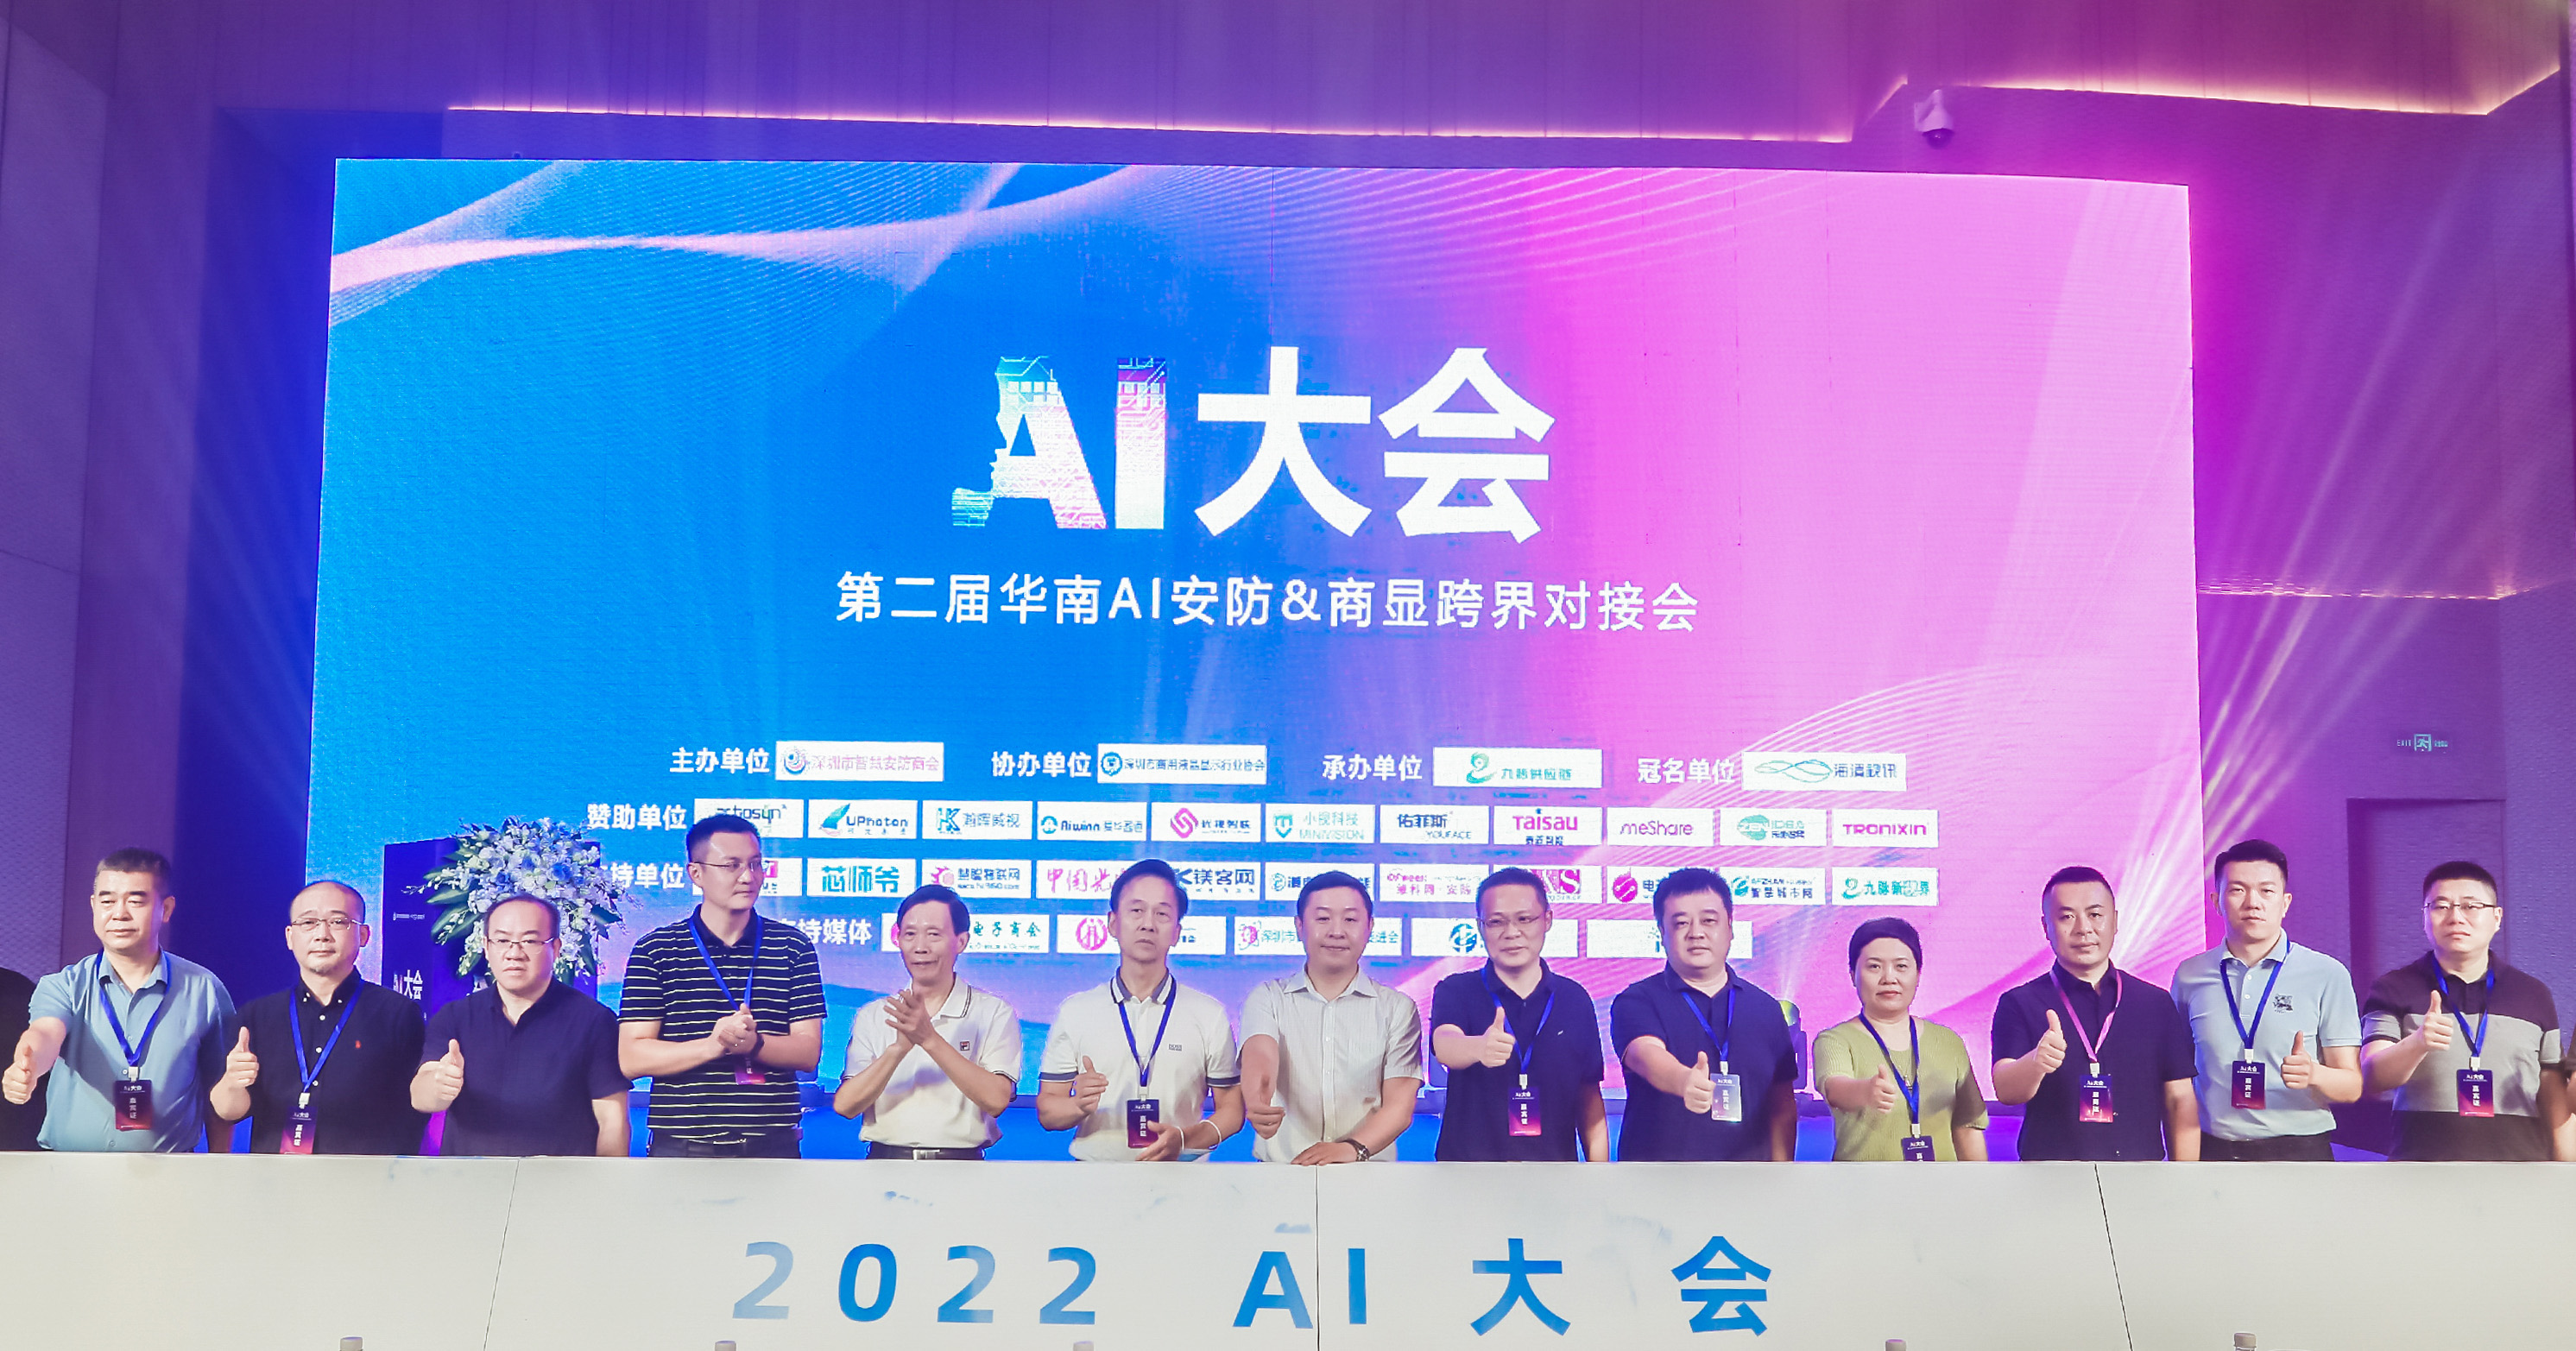 2022 AI Conference Kicks Off in Shenzhen, Minivision Technology and Industry Famous Enterprises Talk about Smart Security